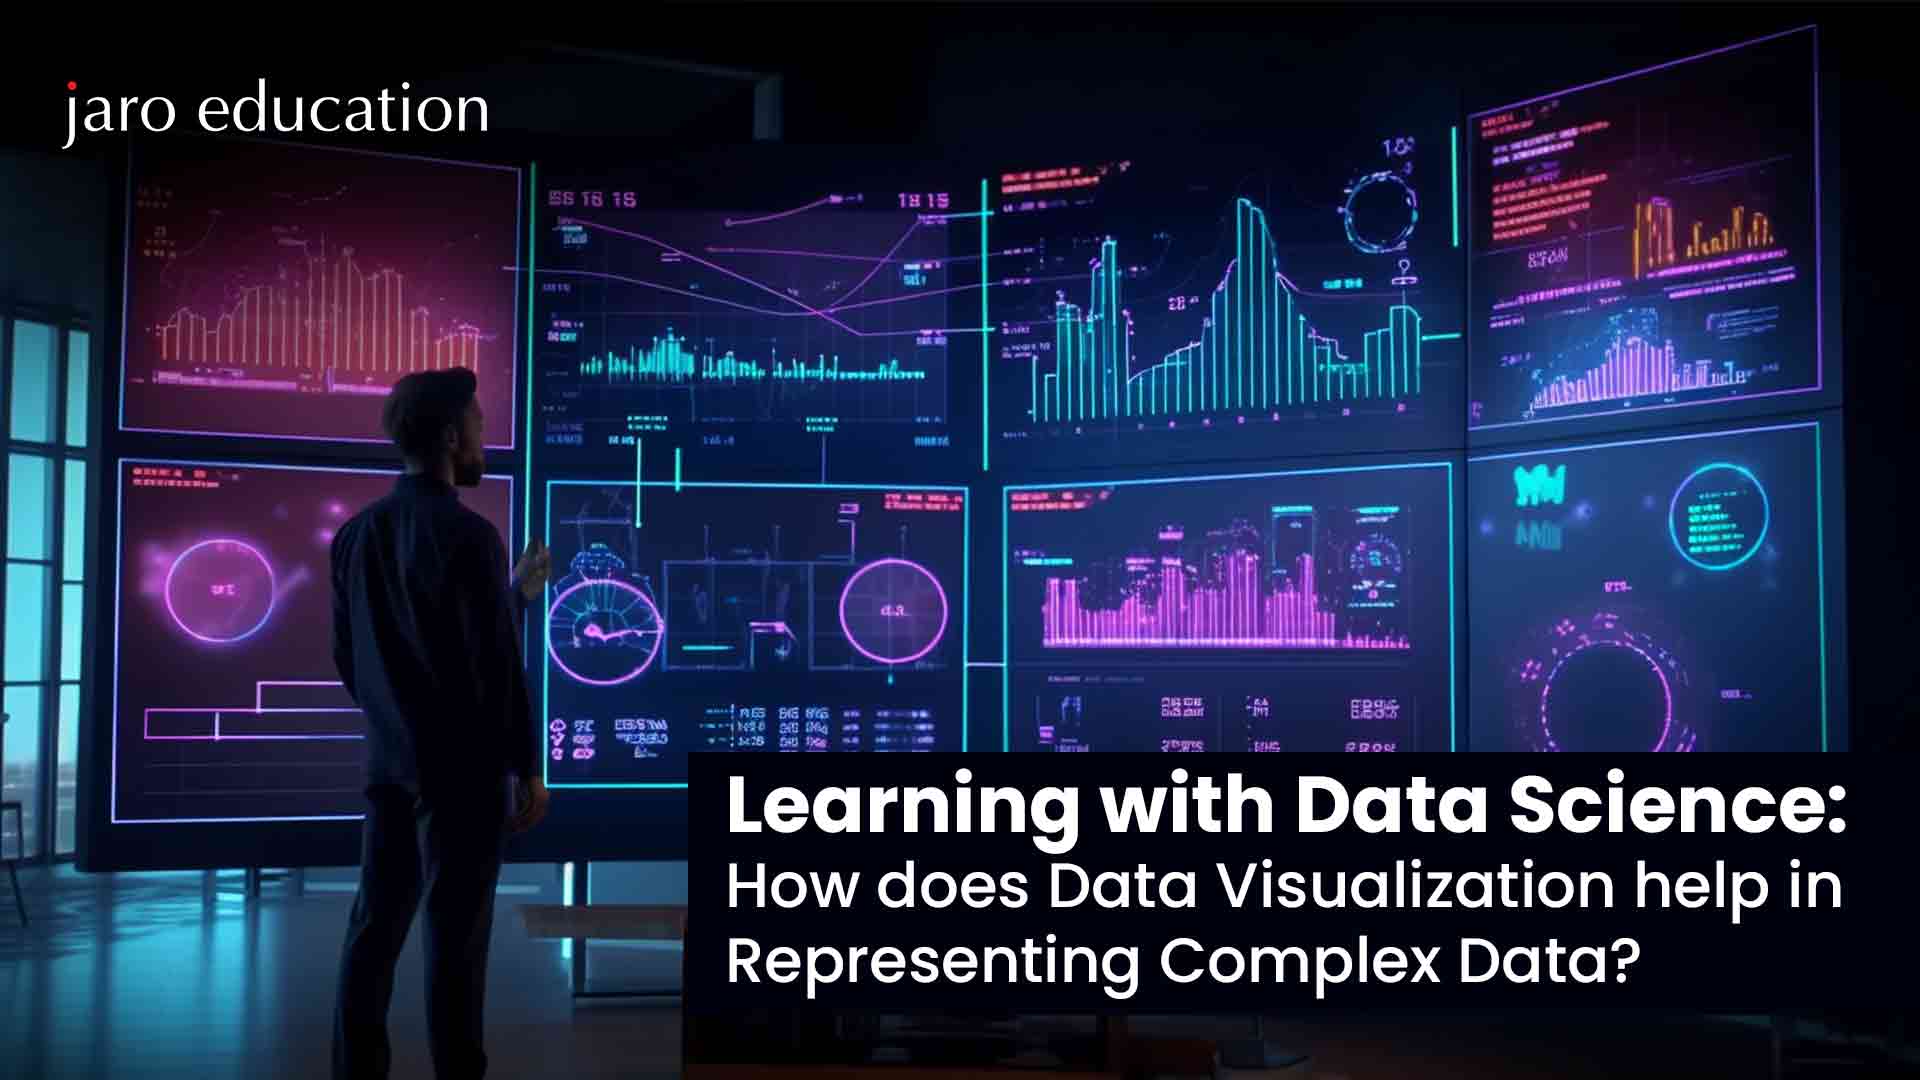 Learning with Data Science How does Data Visualization help in Representing Complex Data